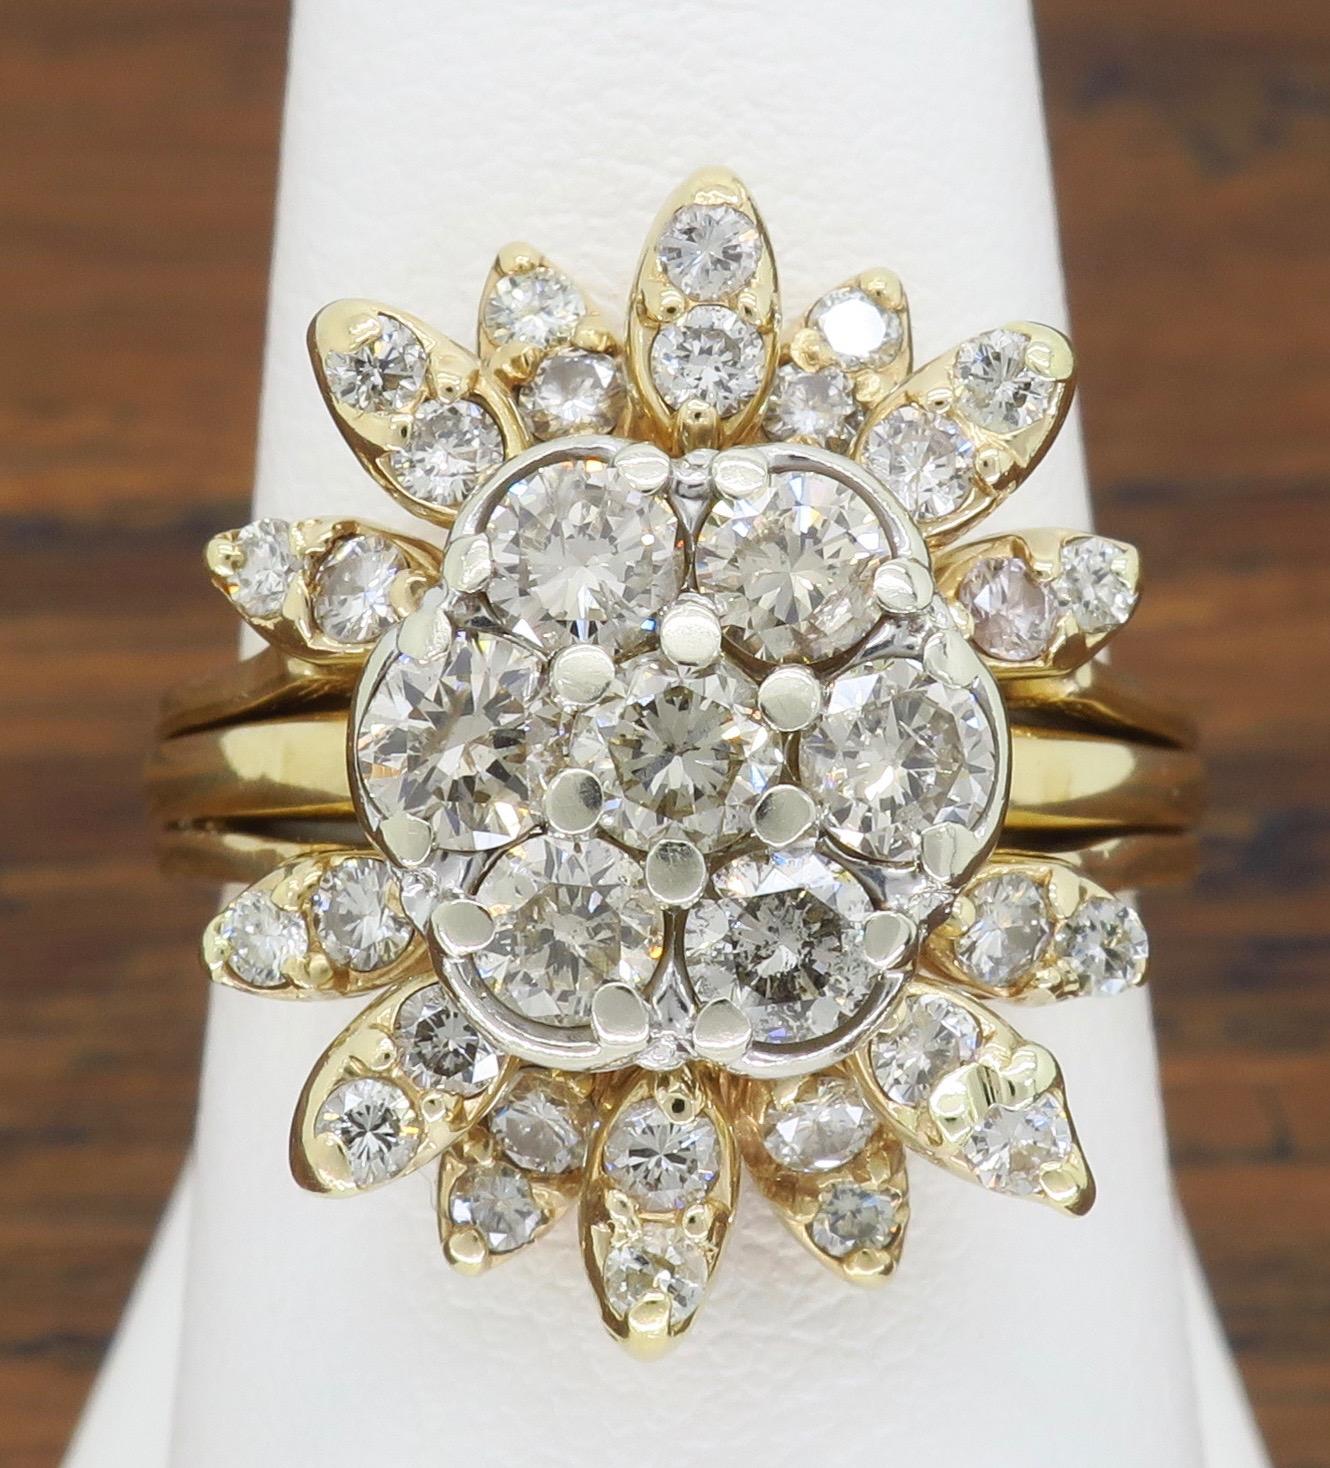 This beautiful 14k gold vintage diamond ring features 1.50CTW of diamonds set in a floral design.

Diamond Cut: 35 Round Brilliant Cut
Average Diamond Color: G-K
Average Diamond Clarity:  SI1-I1
Diamond Carat Weight:  Approximately 1.50CTW
Metal: